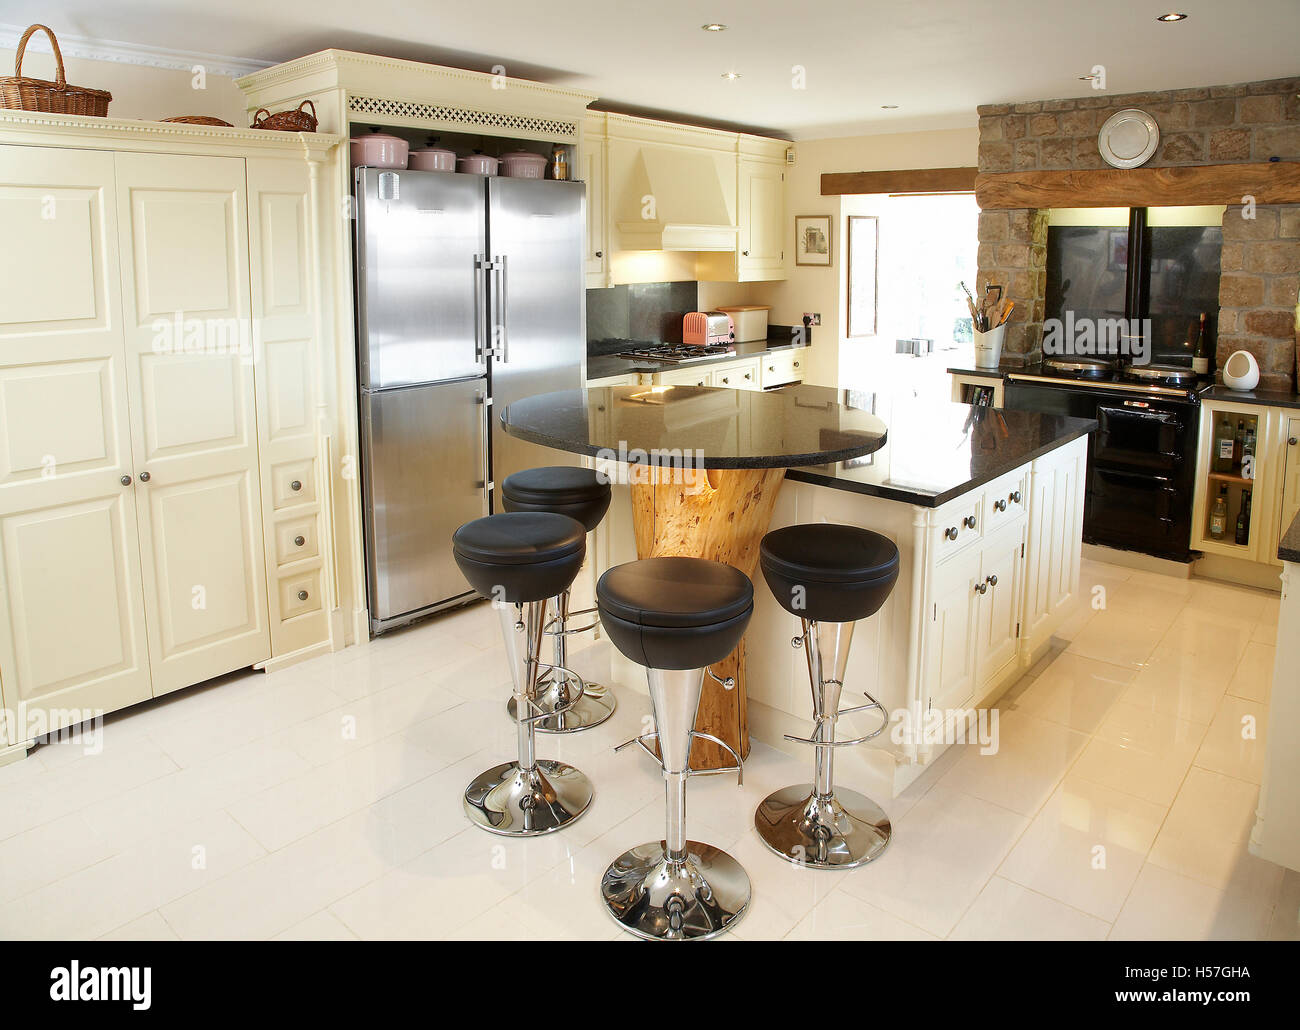 A bespoke country kitchen in a house in the UK using the trunk of a tree as a breakfast island. Stock Photo